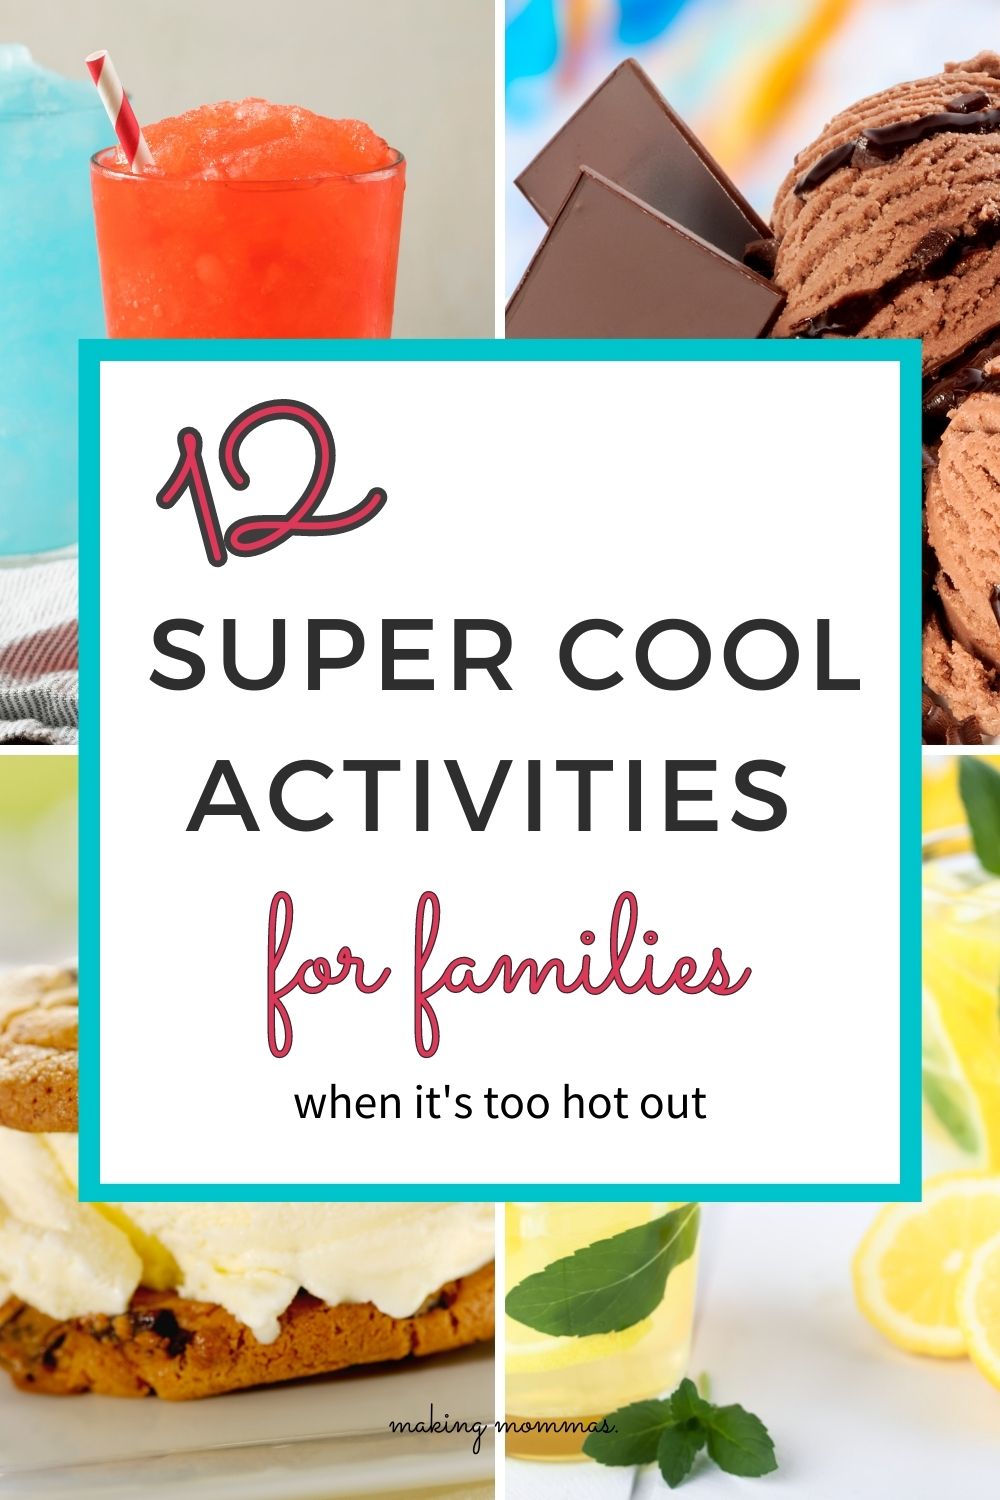 pin of 12 super cool activities for families when its too hot out